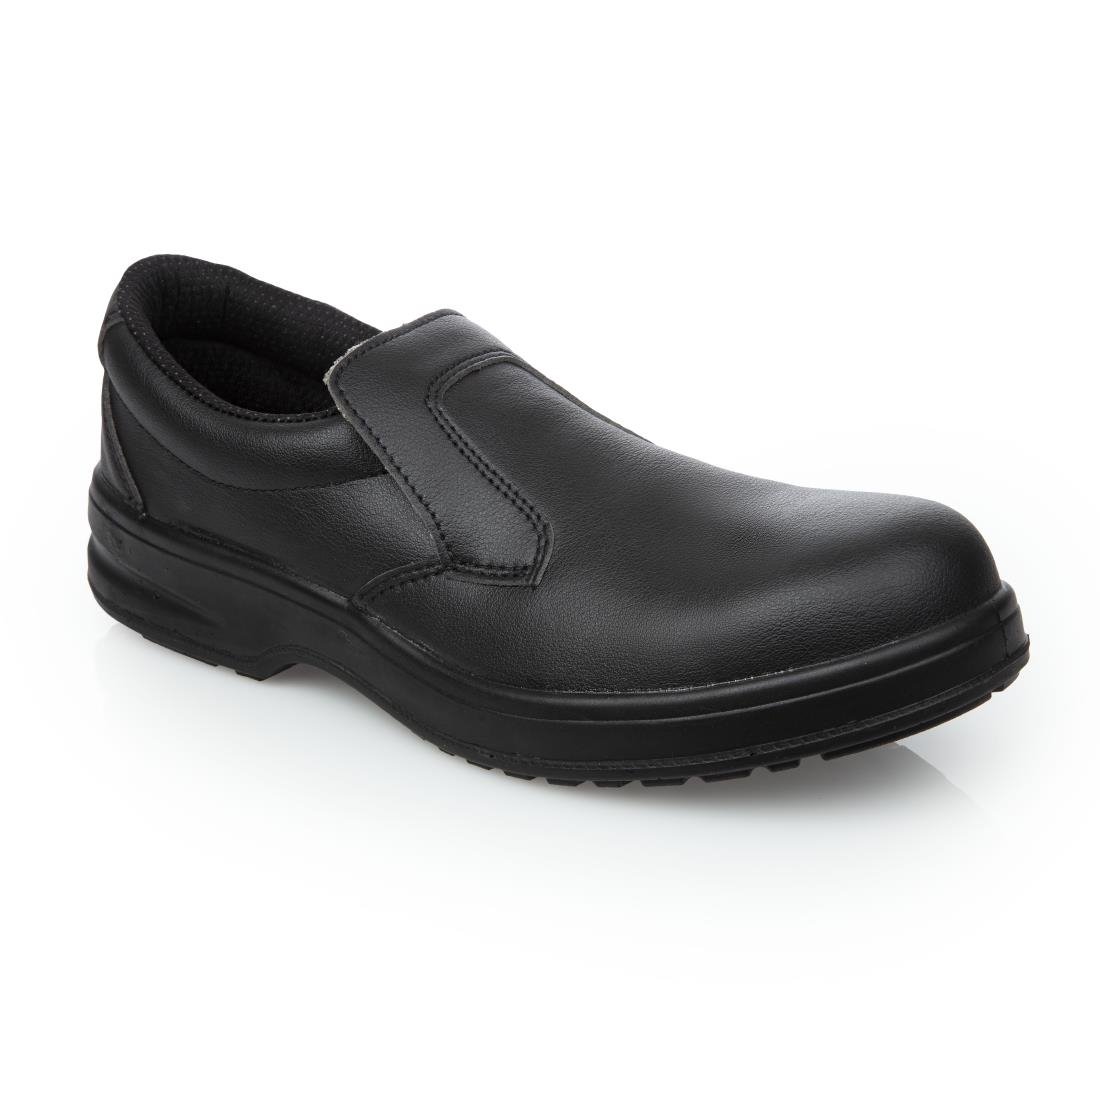 A845-45 Slipbuster Lite Slip On Safety Shoes Black 45 JD Catering Equipment Solutions Ltd